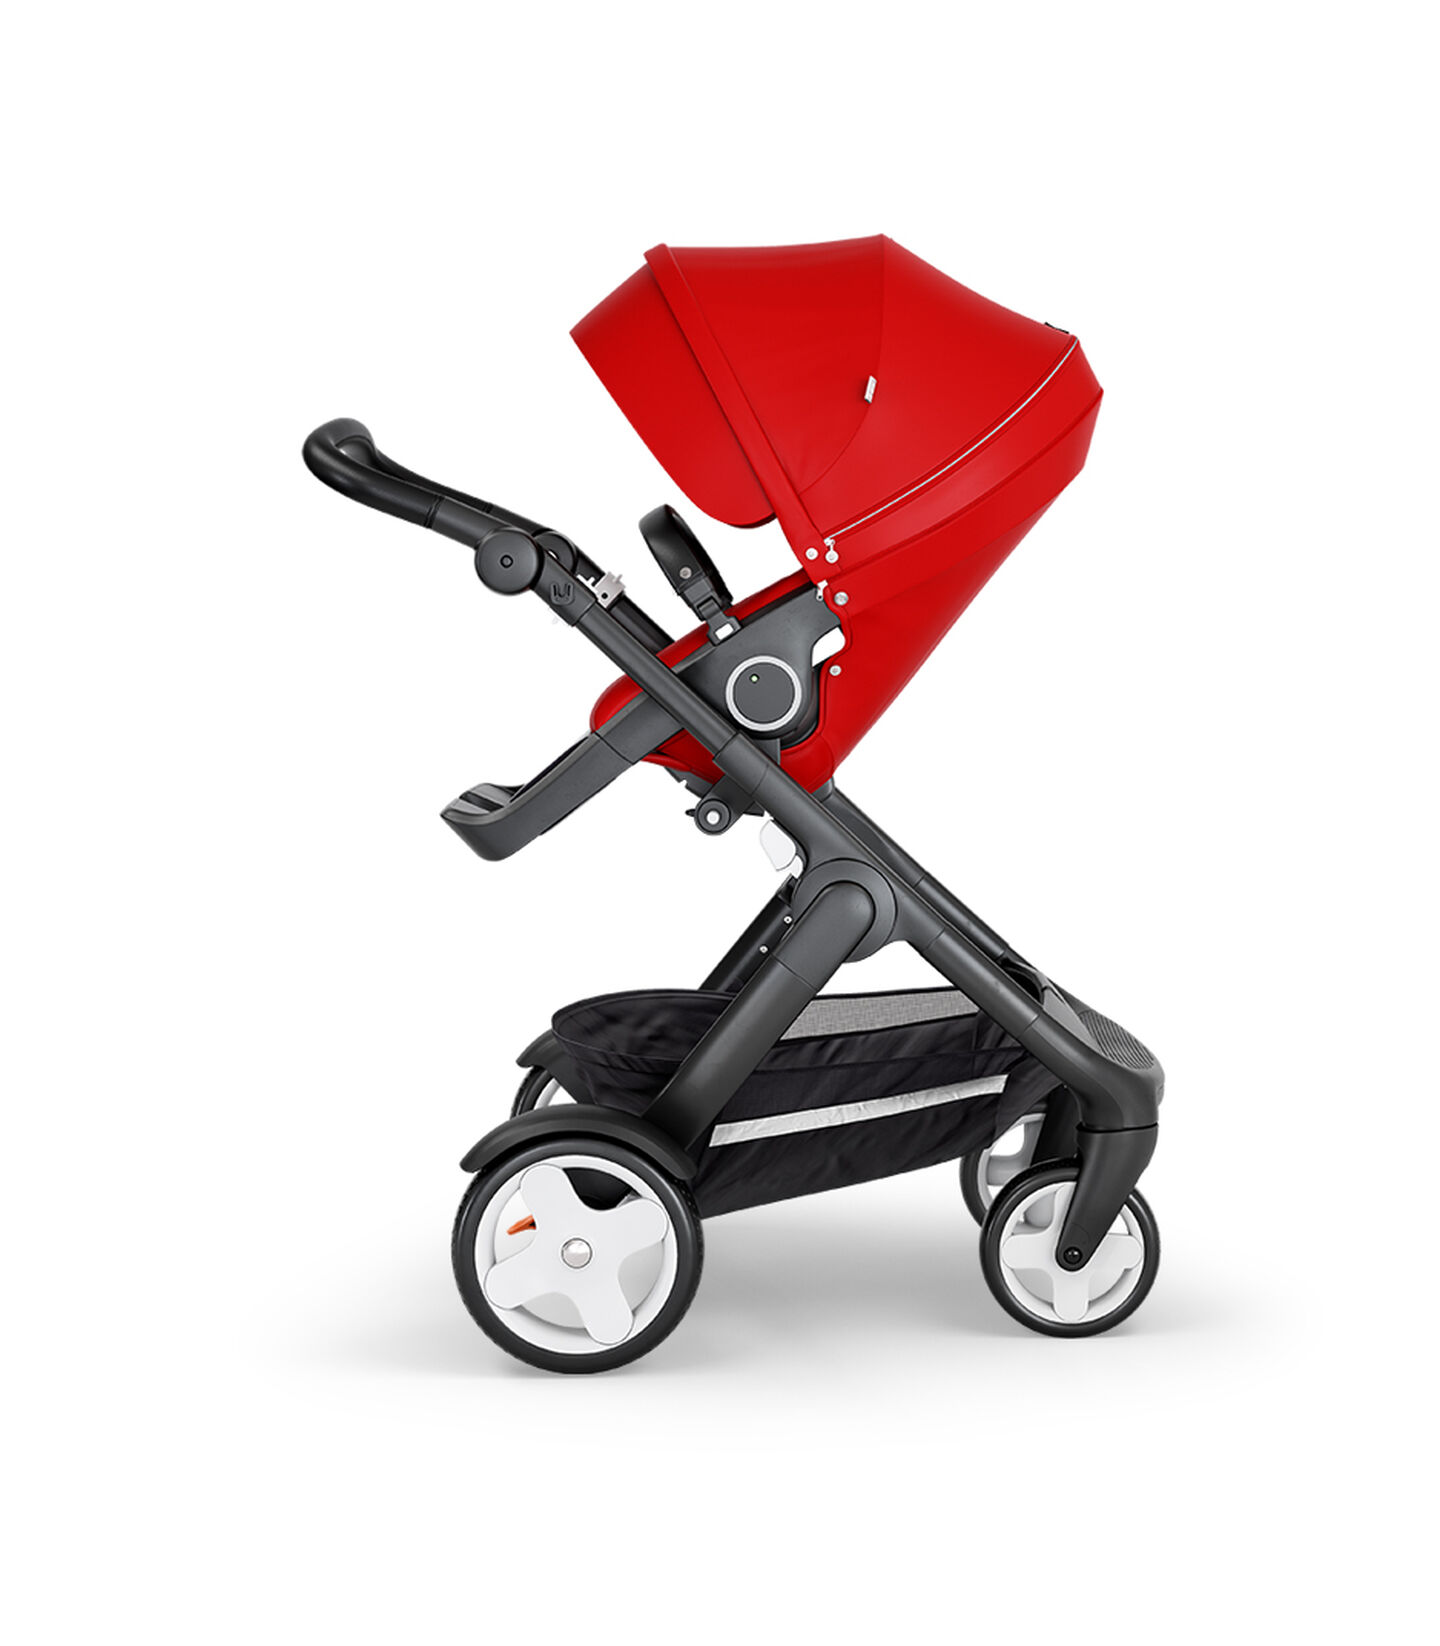 The comfortable all stroller